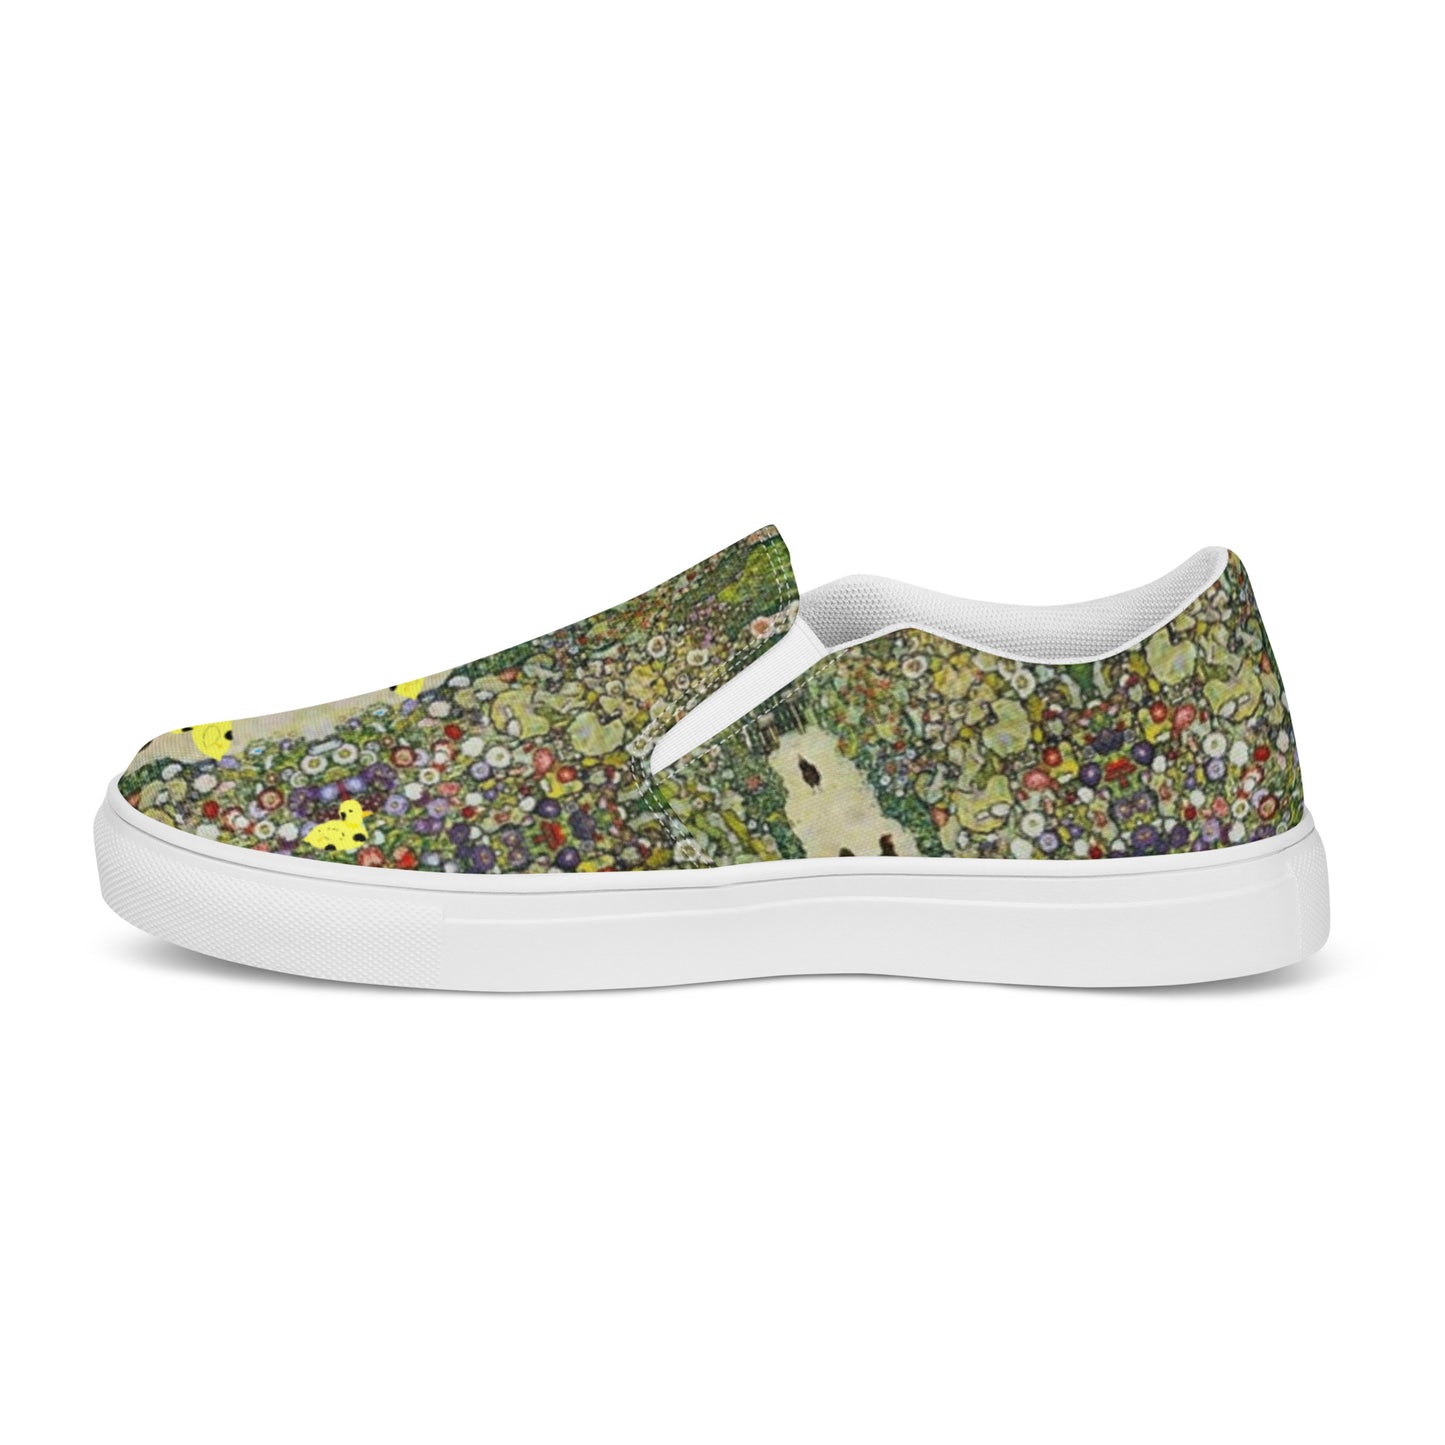 Slip-on canvas shoes with Myrtle and Gustav's Chickens by D.B. print (Women's sizing)